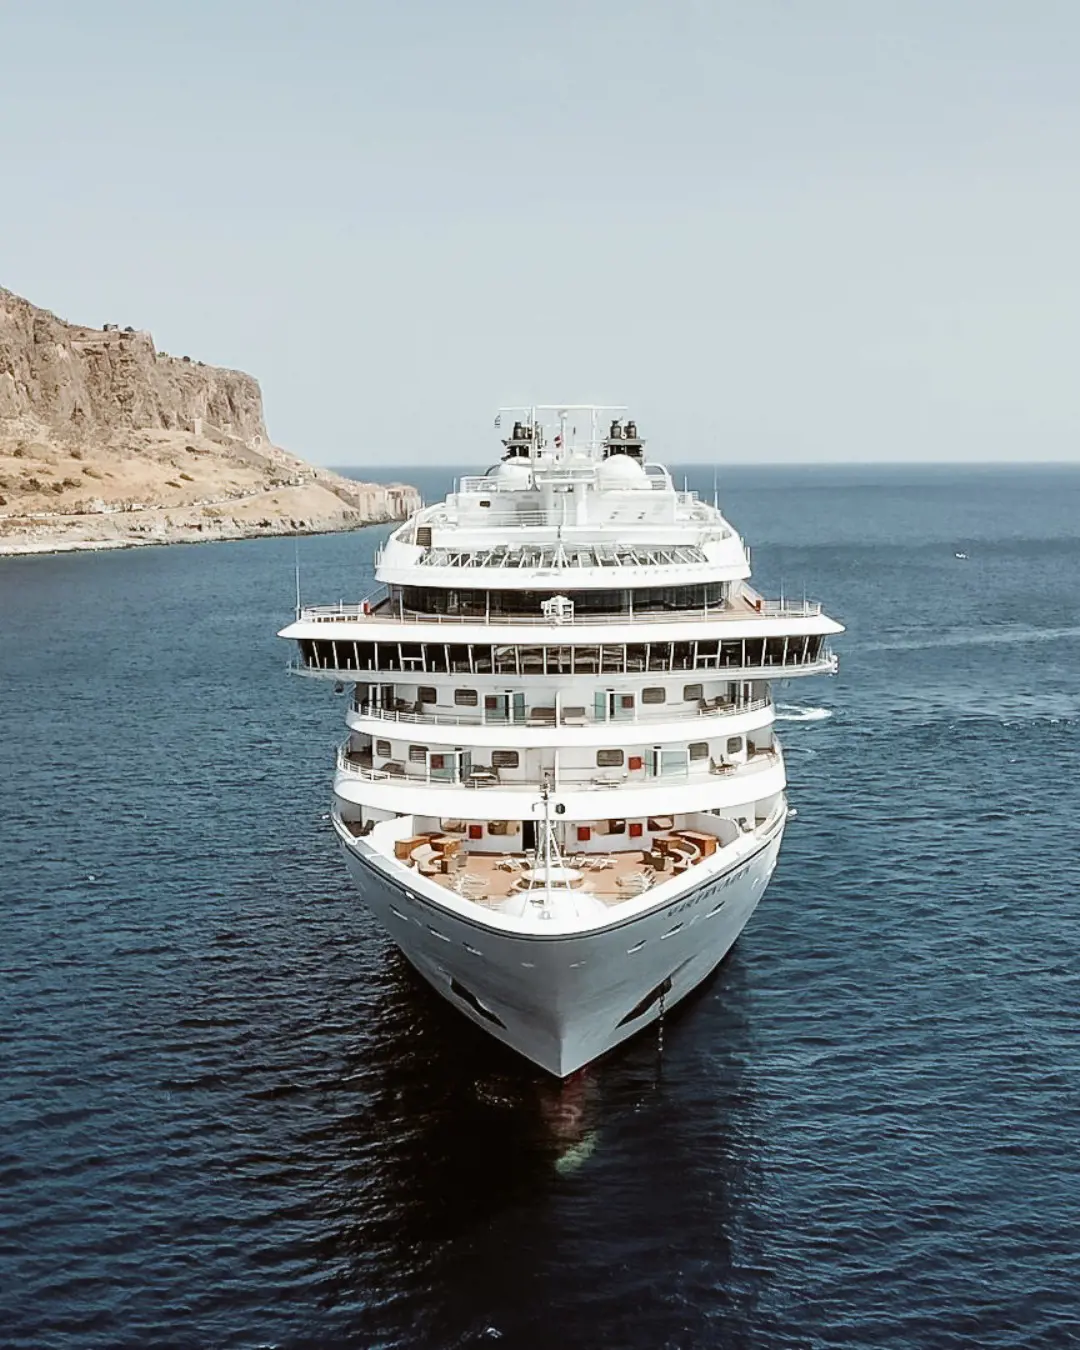 Seabourn Ovation was launched in 2017.